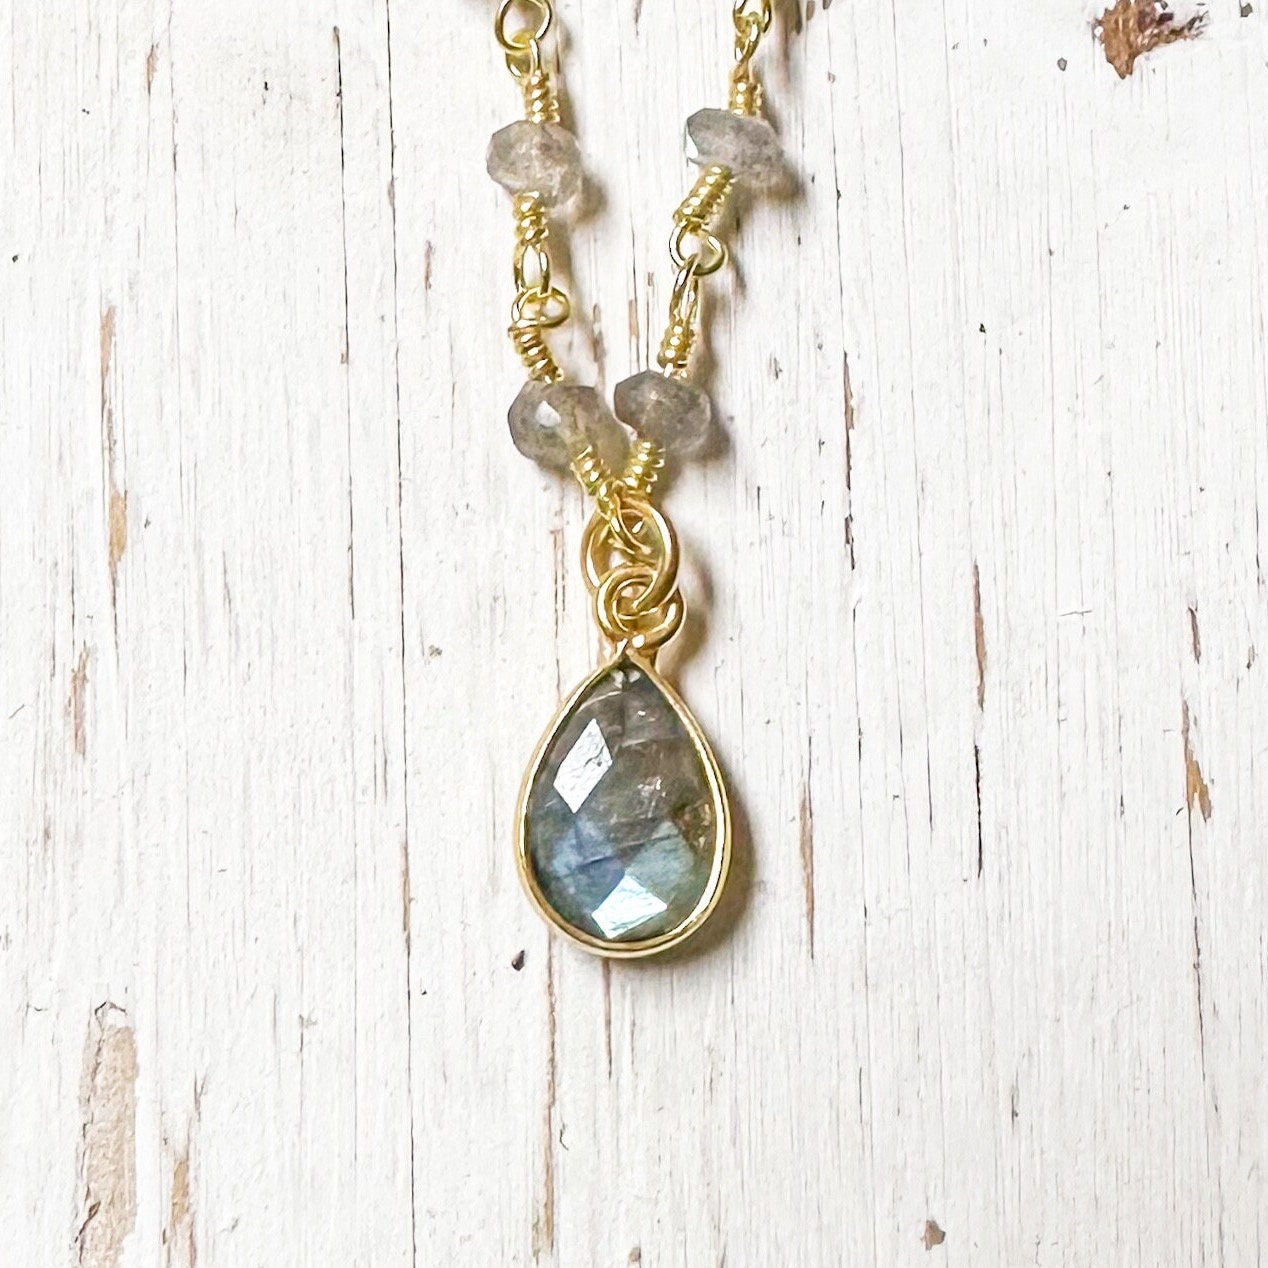 Labradorite and Gold necklace with Teardrop Pendant